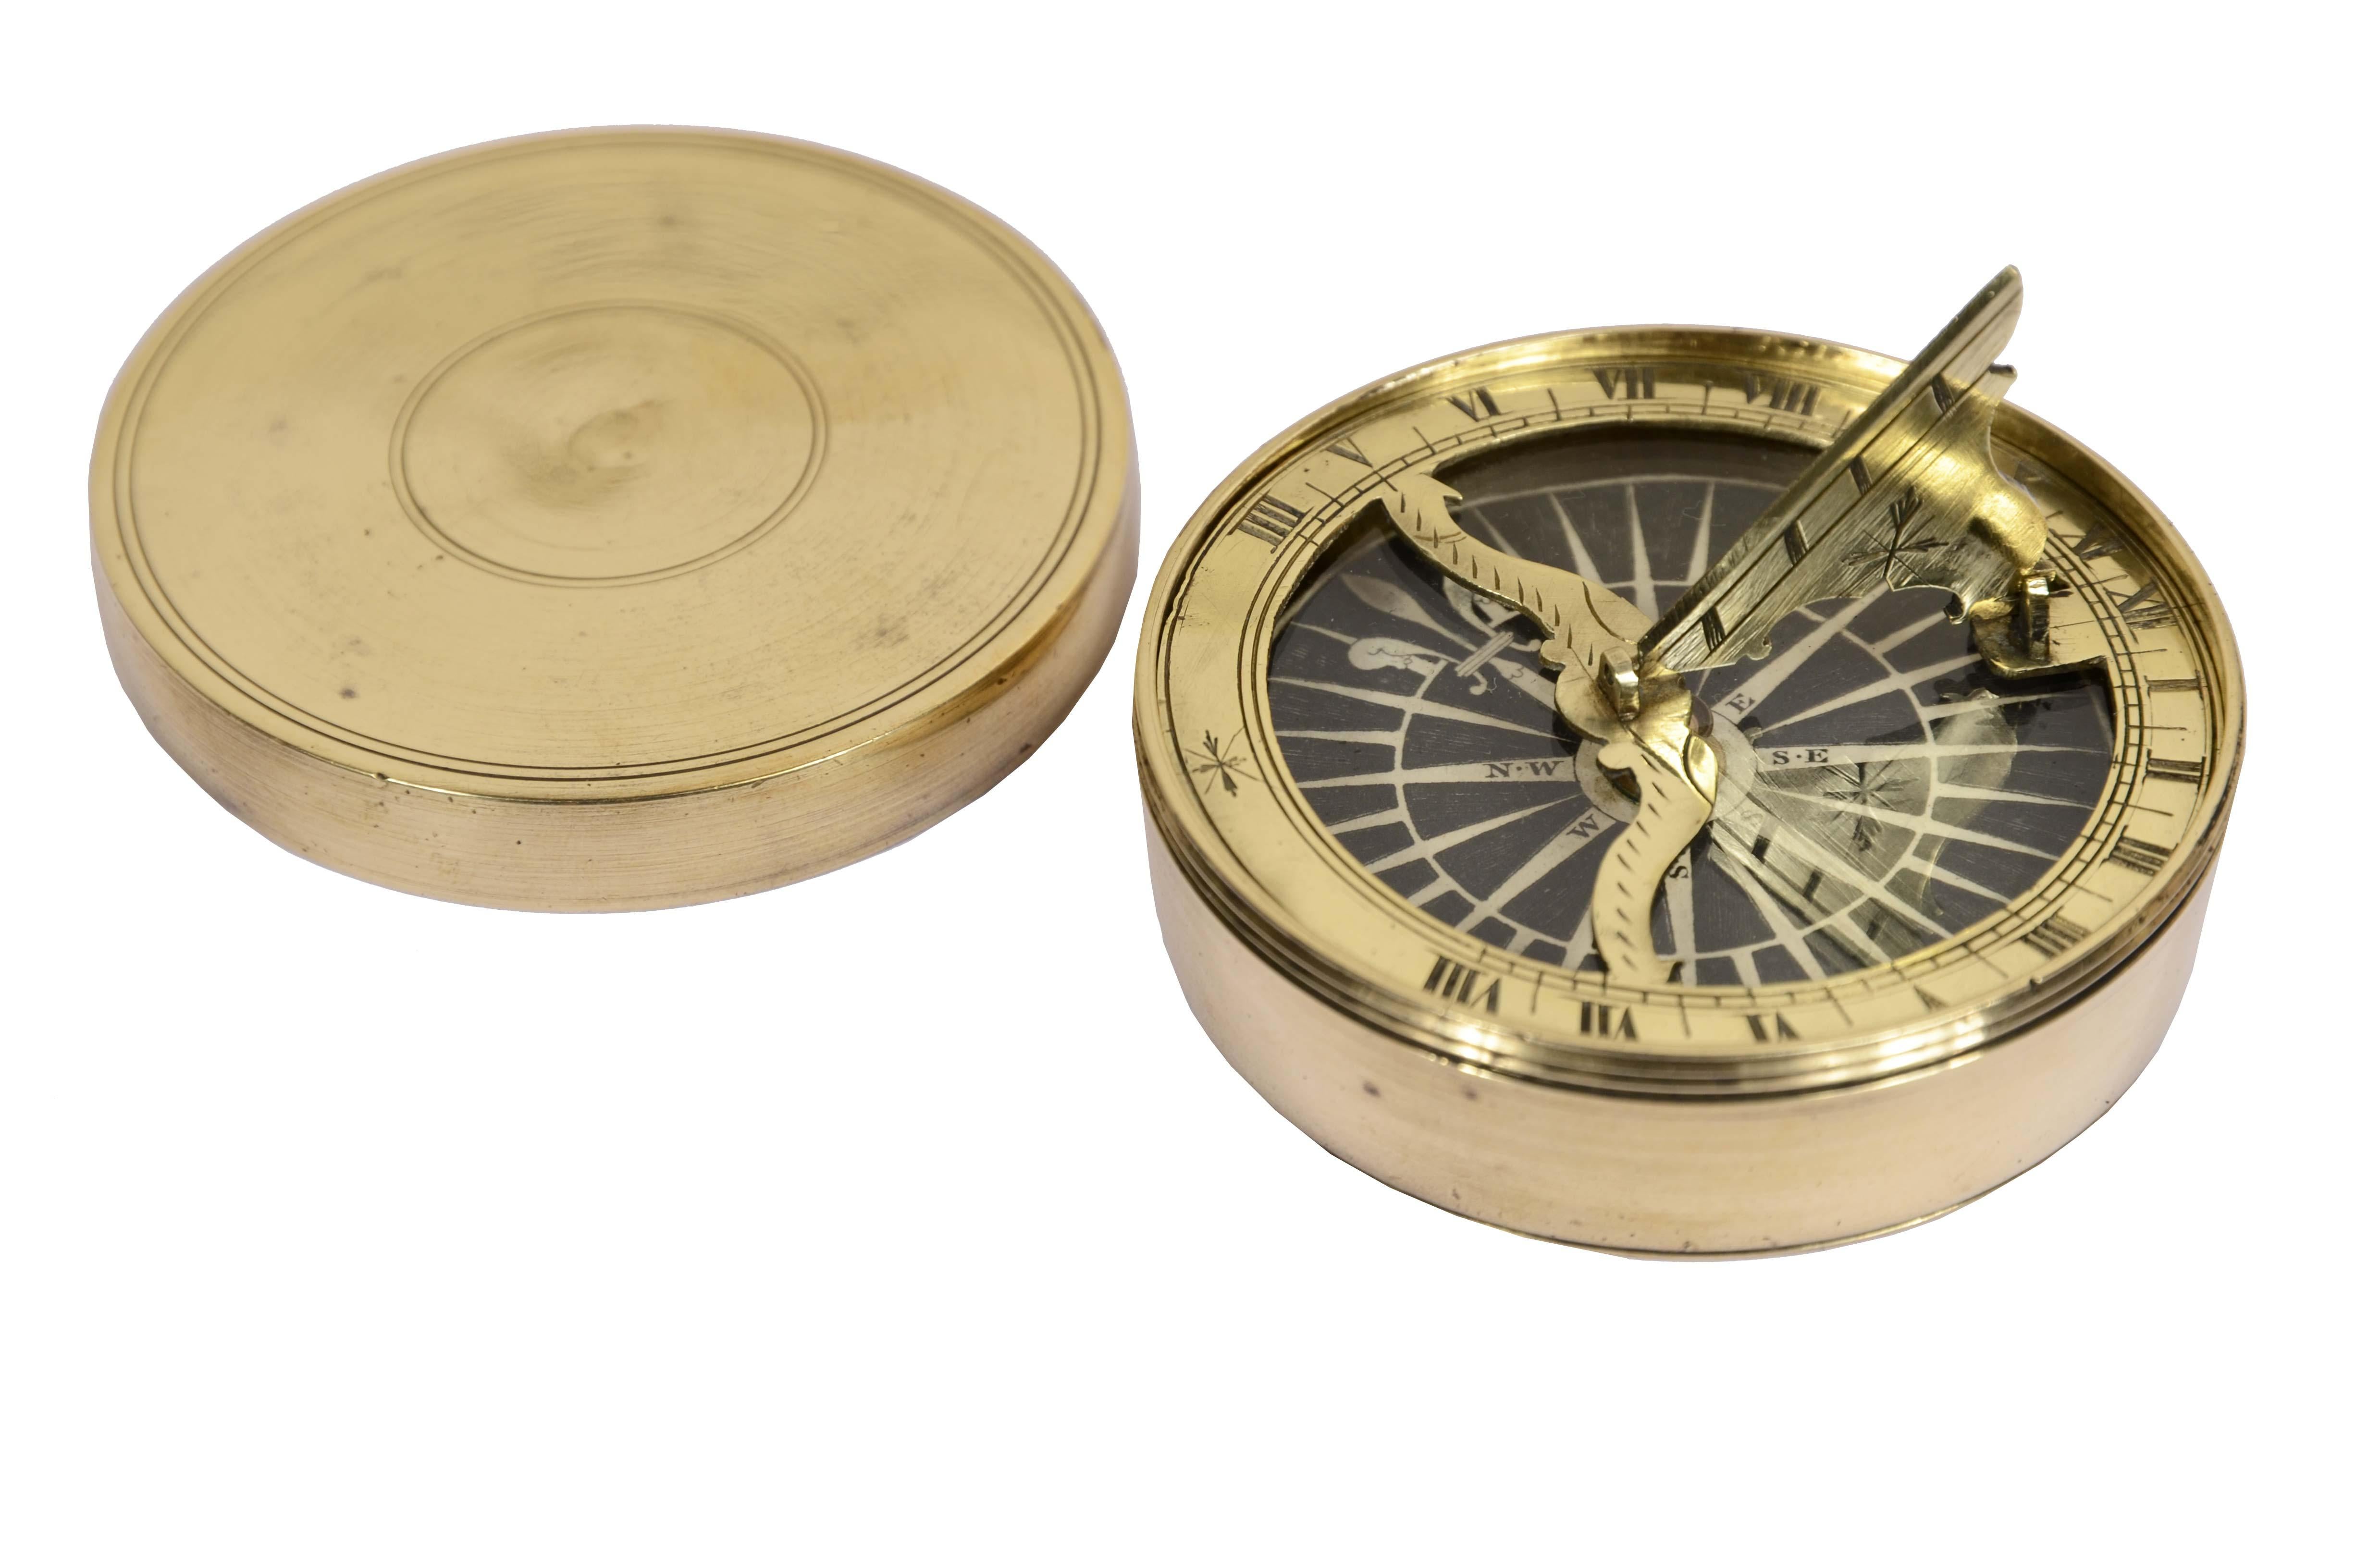 Rare nautical compass and sundial together, English manufacture from the first half of the 19th century, housed in a turned box  brass complete with screw-on cover. Rose to sixteen  winds on engraving paper on copper plate, brass sundial with